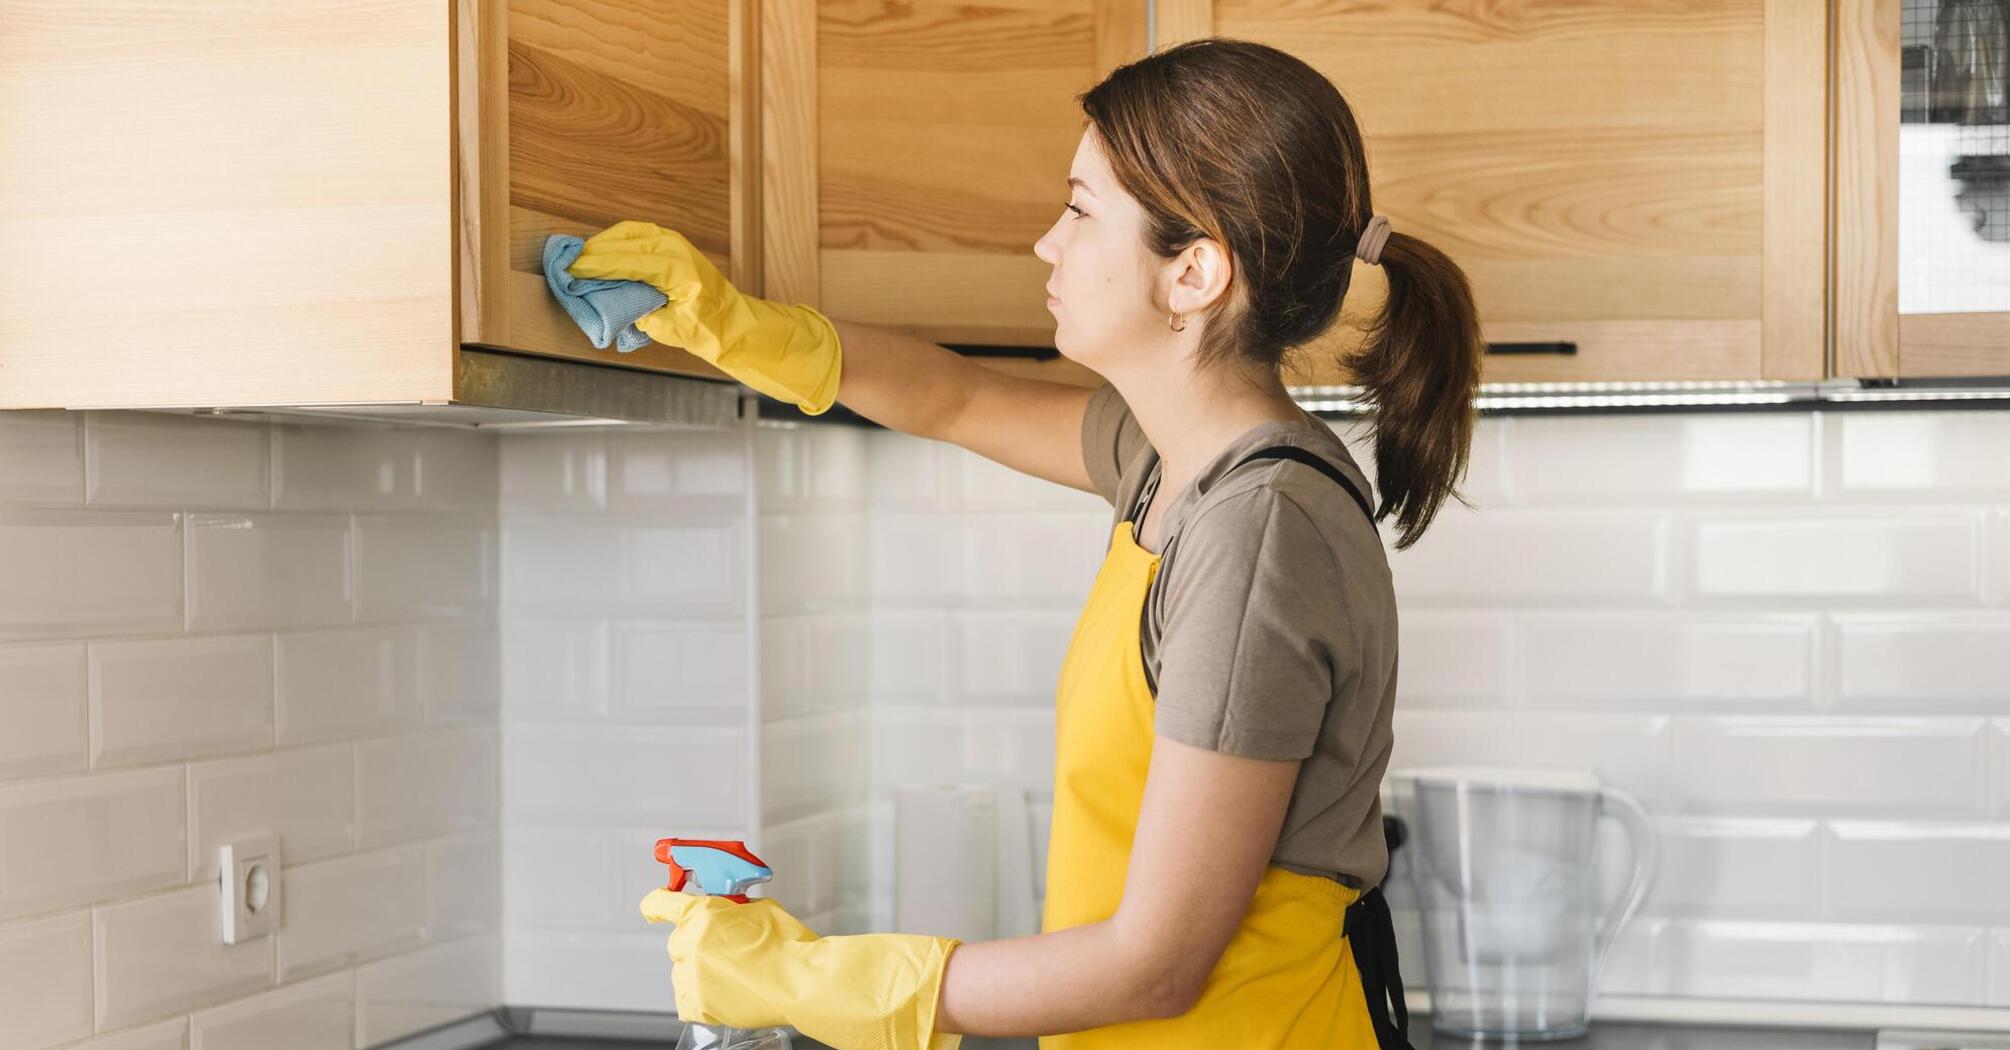 How to clean kitchen cabinets from grease: a recipe for a miracle cure